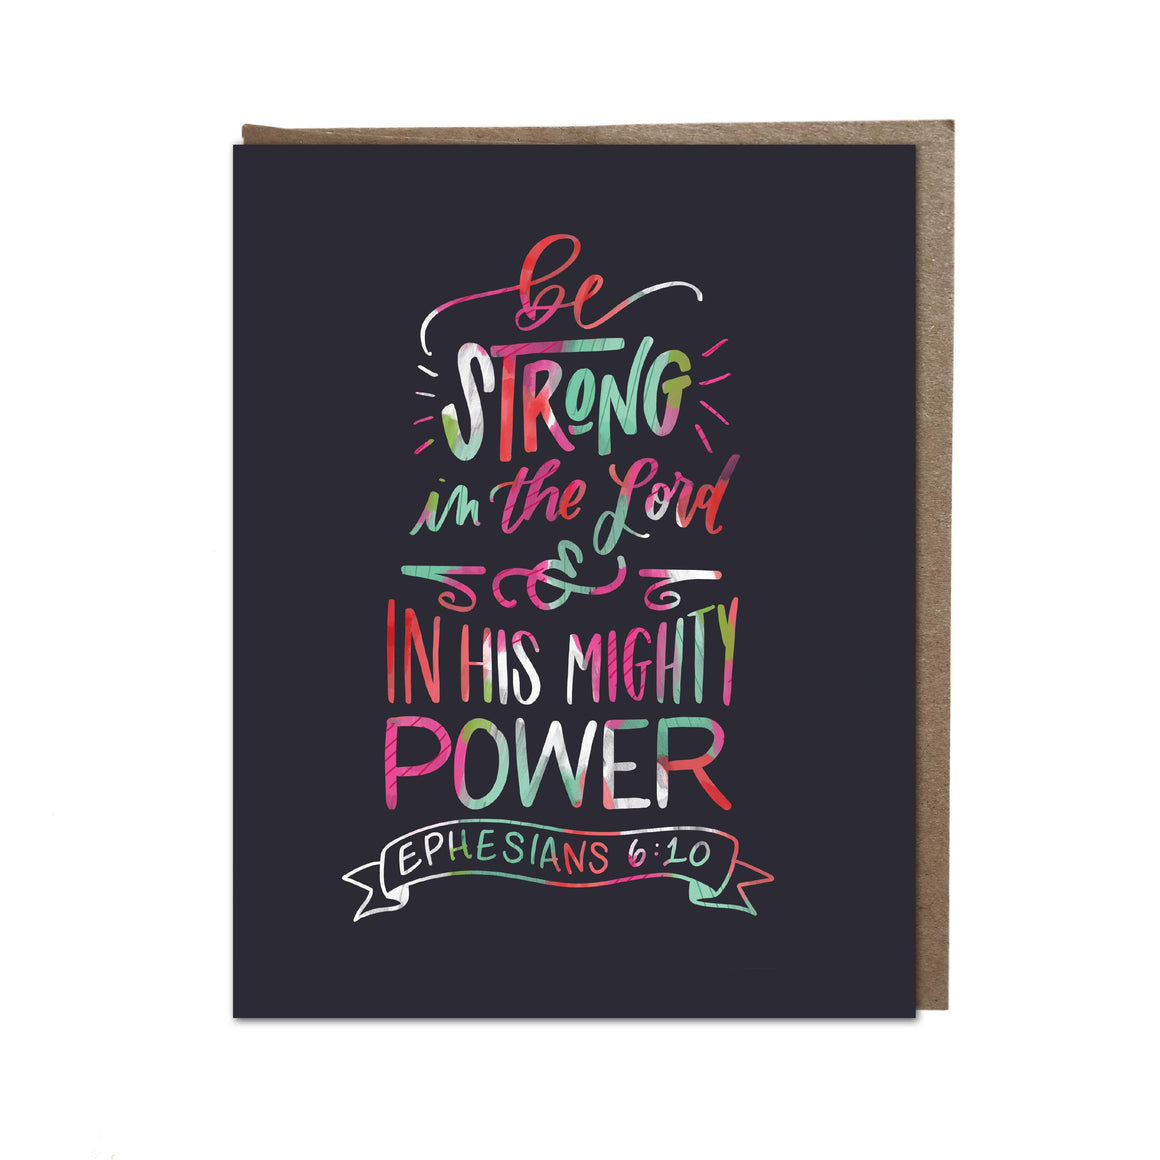 "Be Strong" card